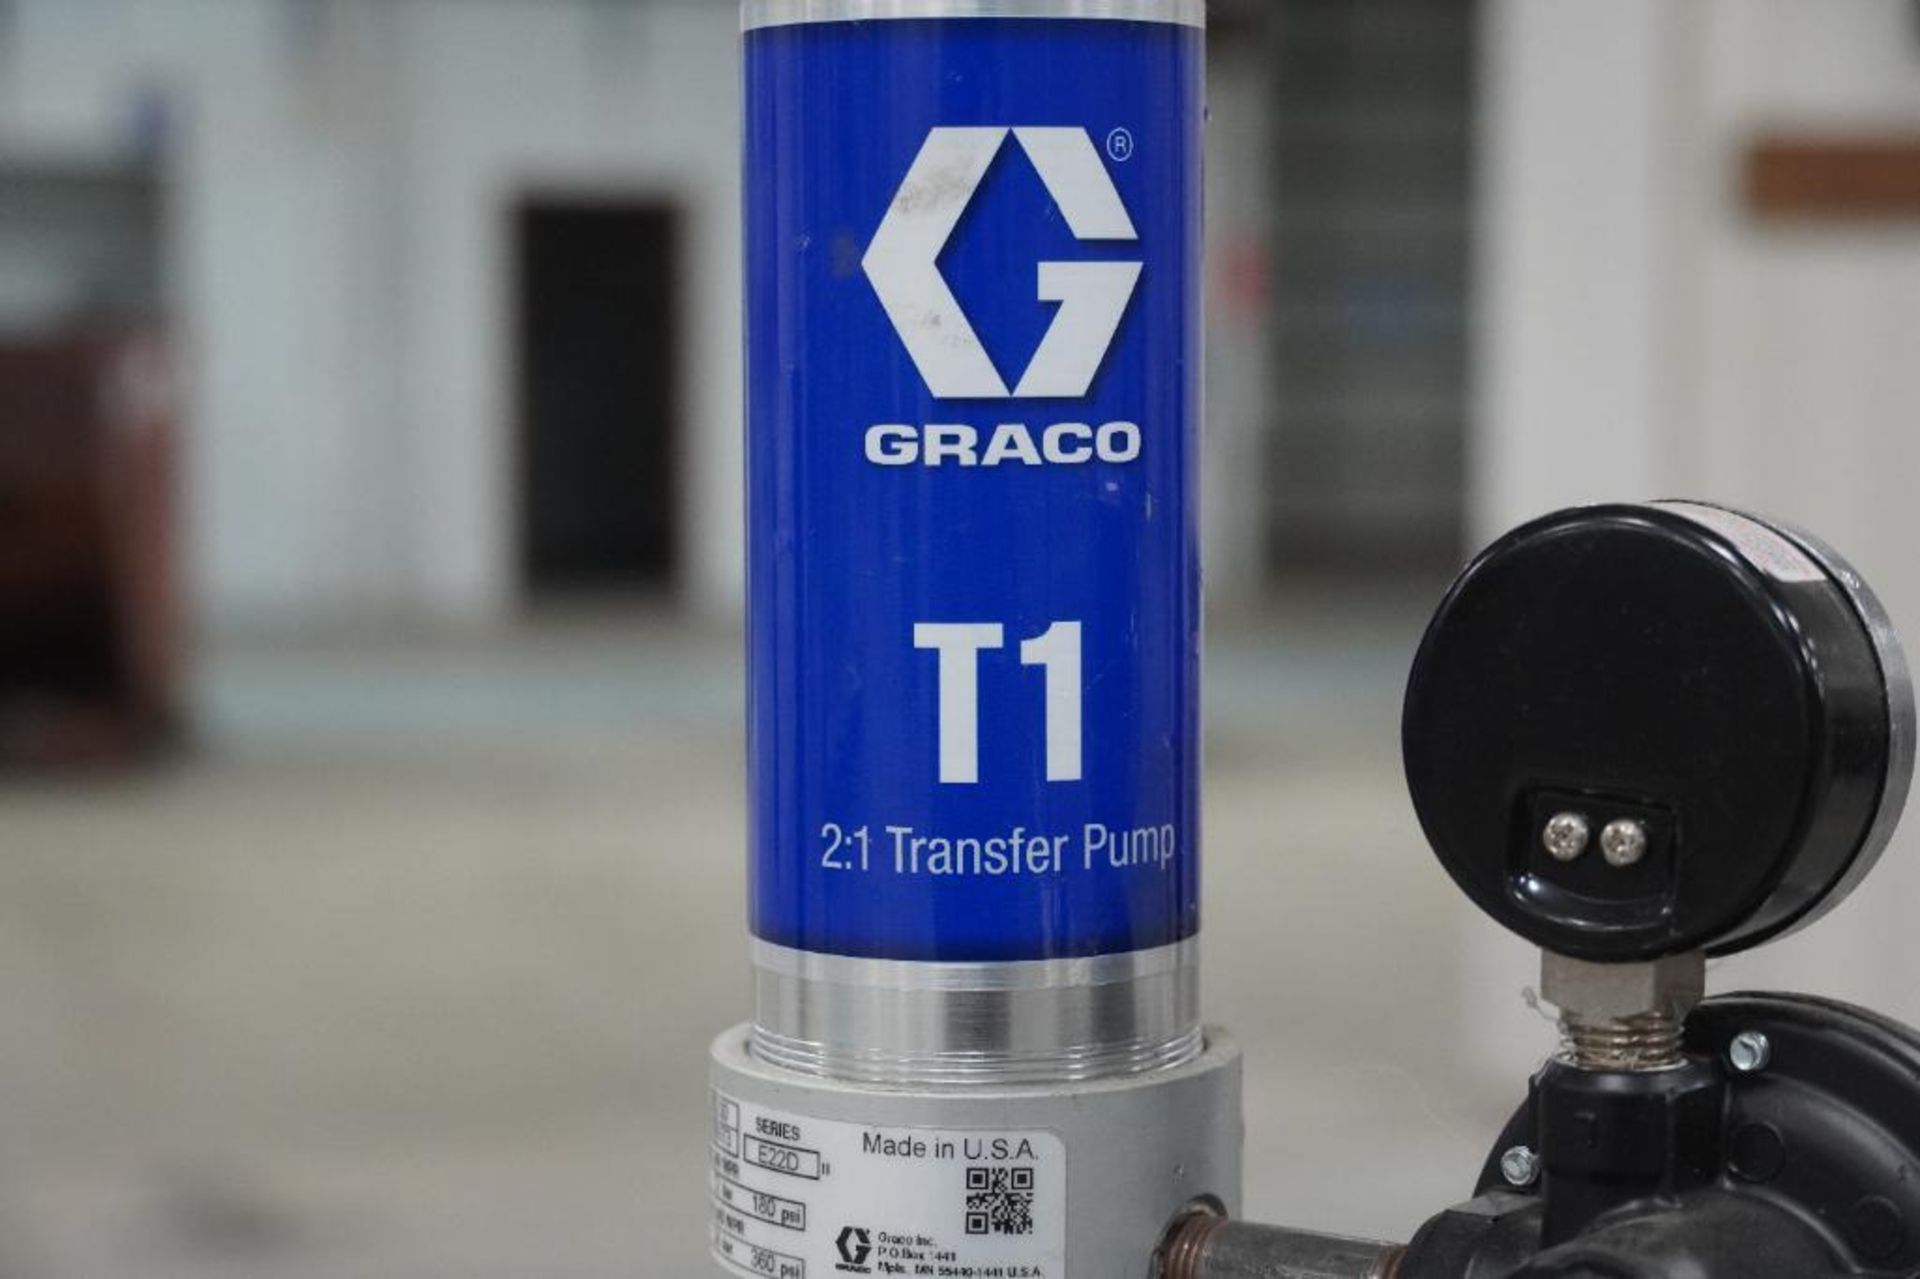 Graco T1 2:1 Transfer Pump - Image 2 of 7